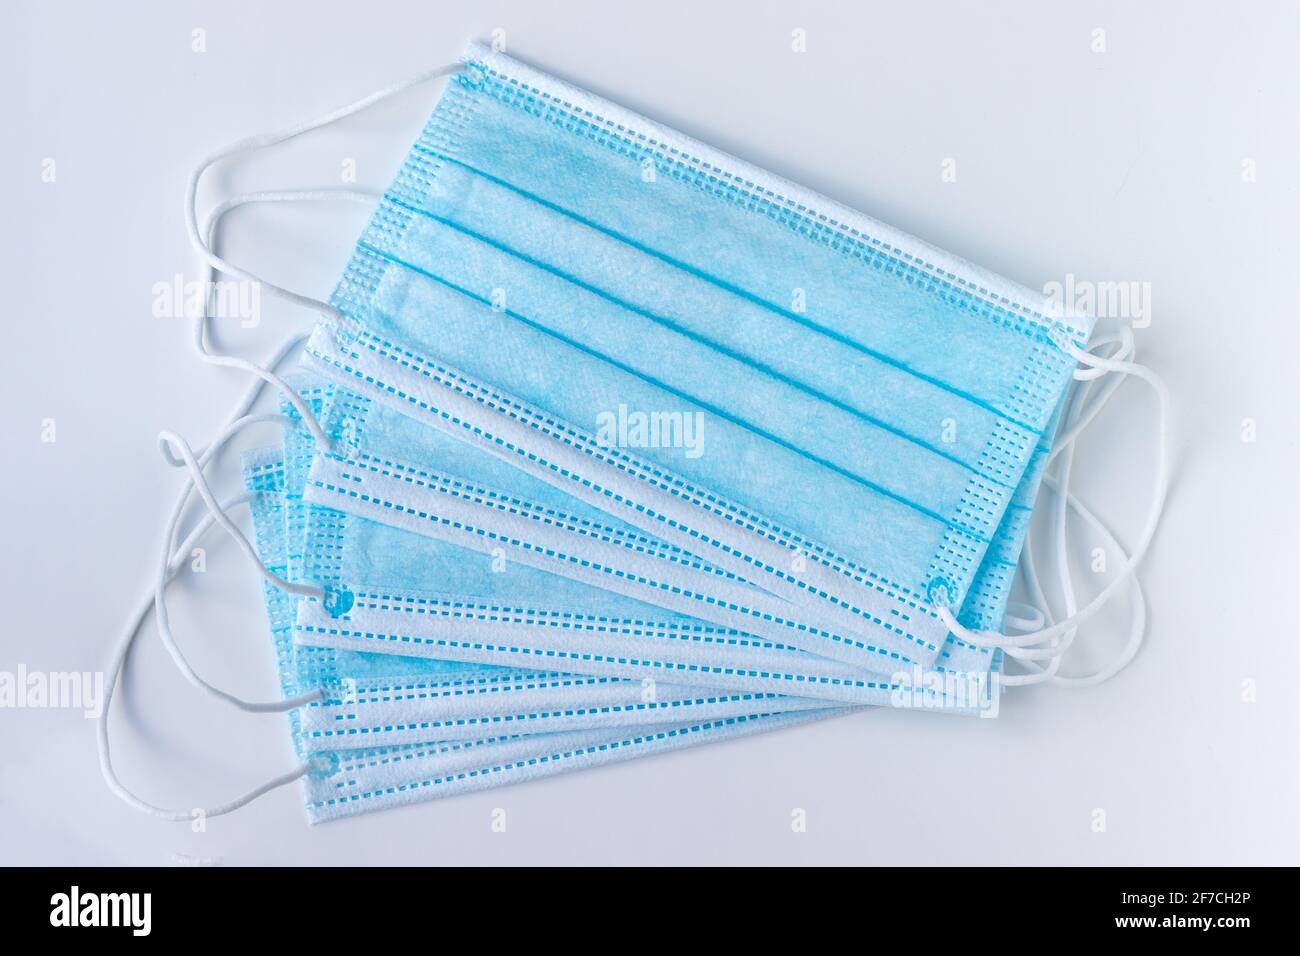 Blue protective medical face masks on a white background. Respiratory protection during quarantine, virus, coronavirus, air pollution Stock Photo